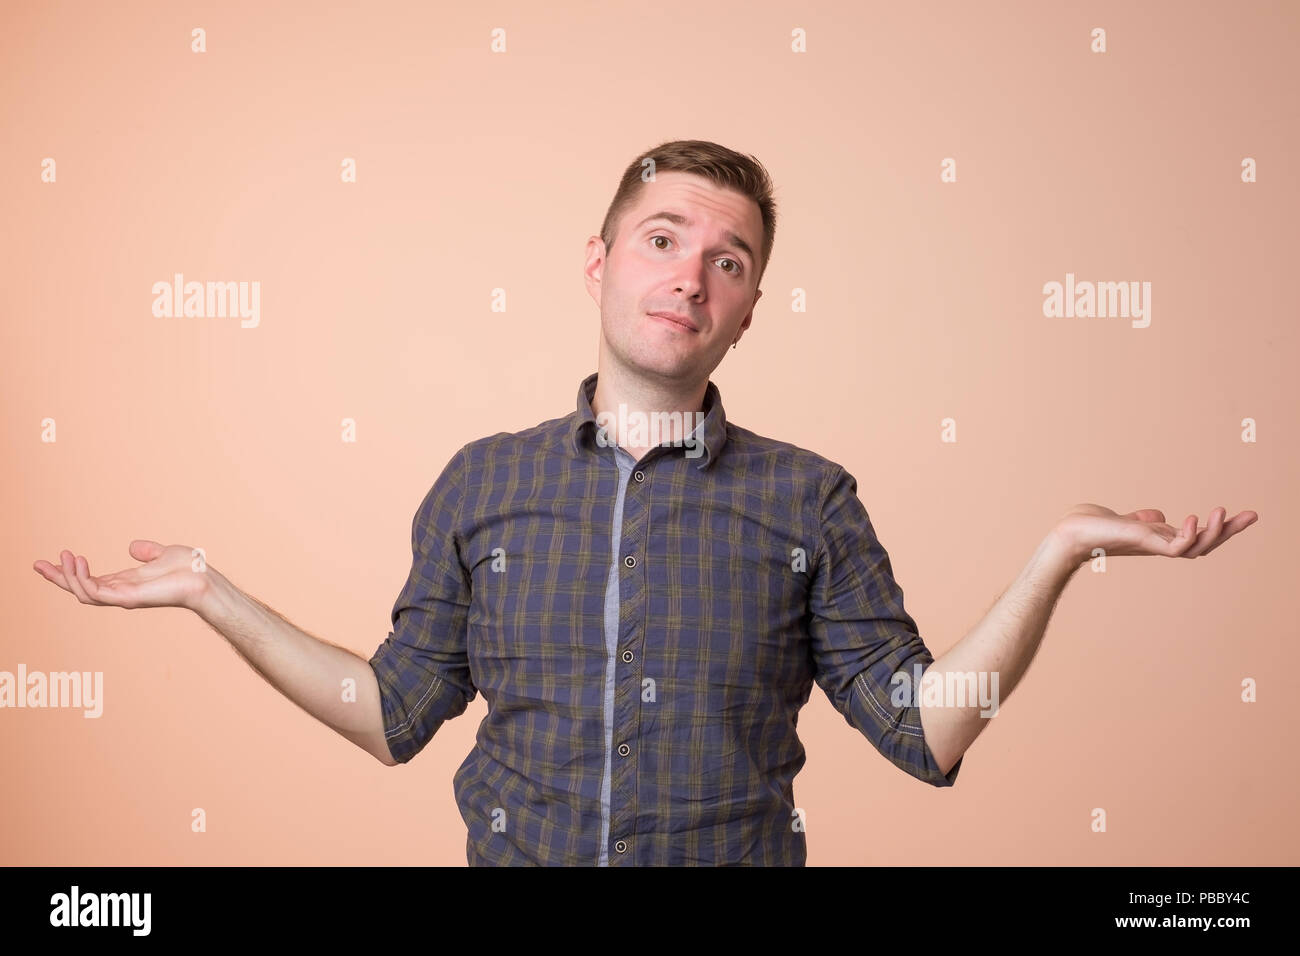 Studio portrait of confused handsome guy showing I have no idea gesture. Stock Photo